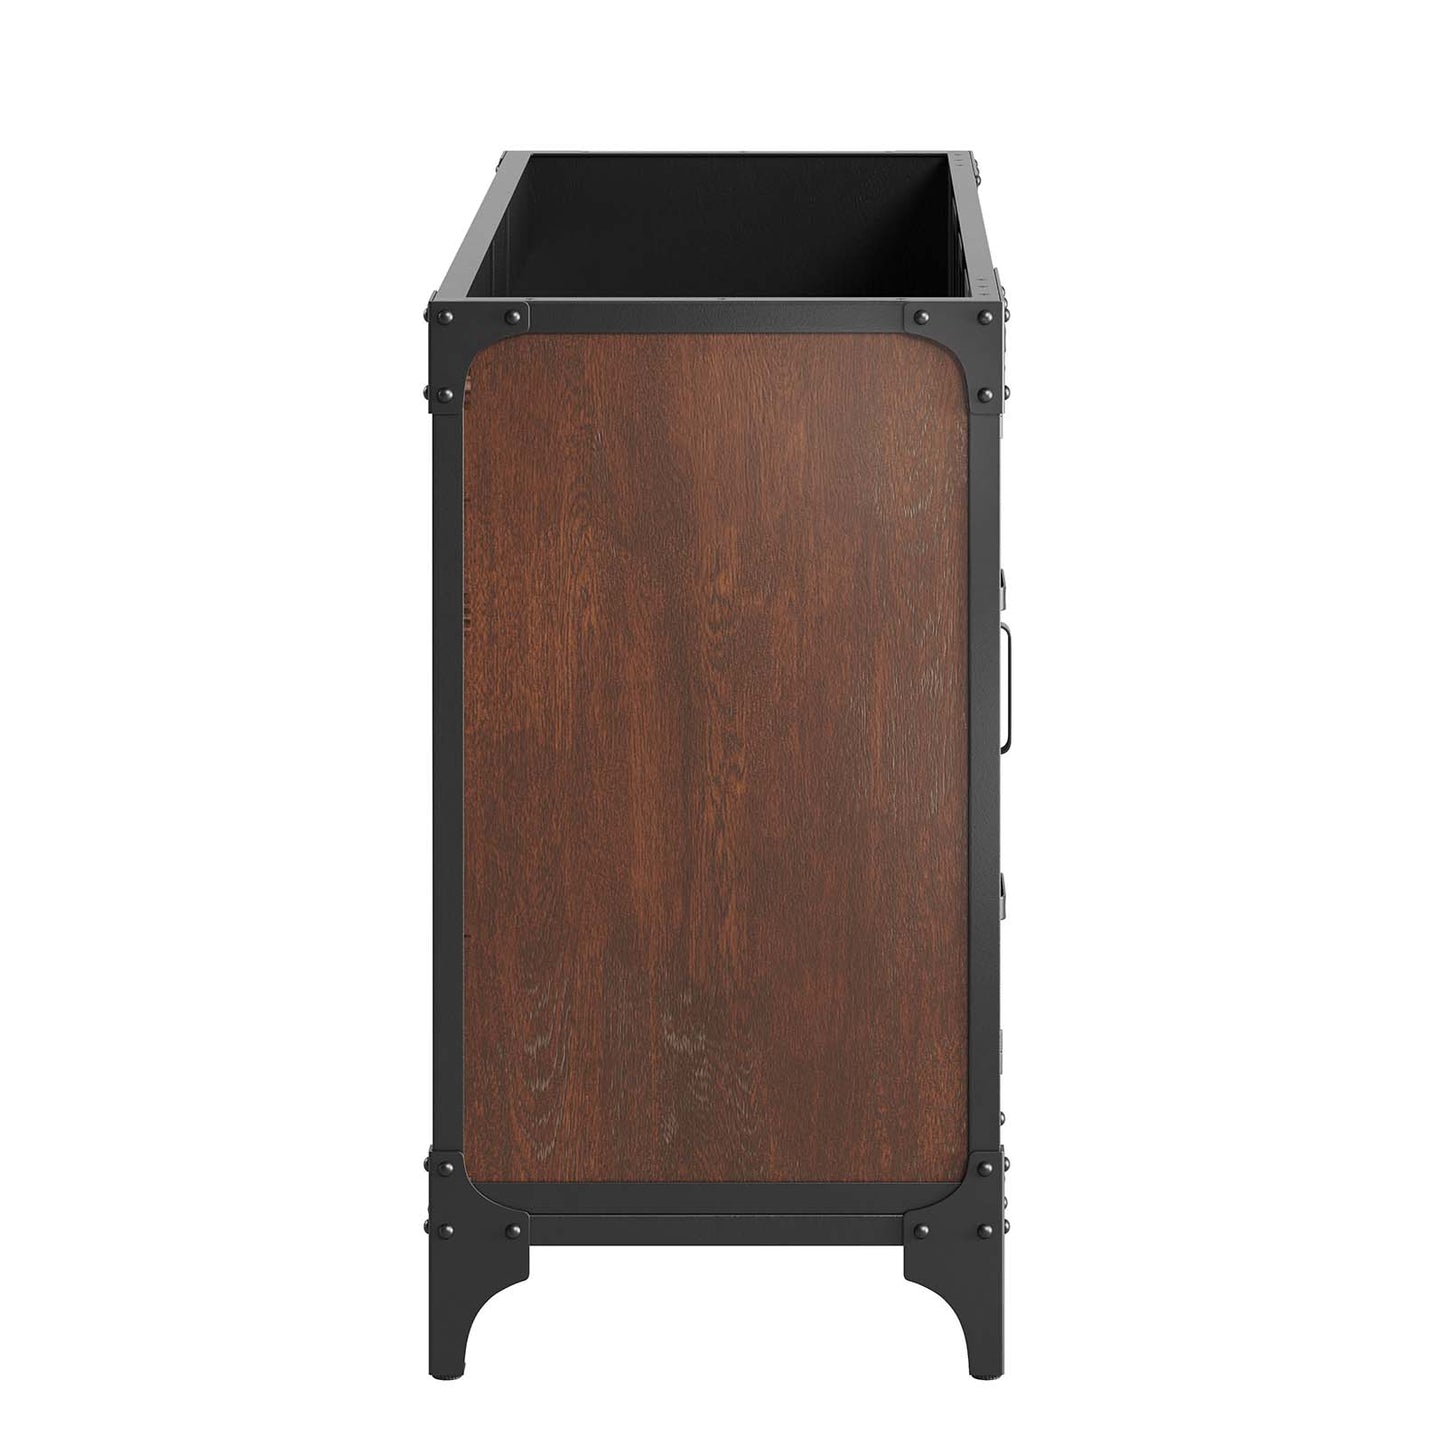 Steamforge 48" Bathroom Vanity Cabinet (Sink Basin Not Included) By Modway - EEI-6130 | Bathroom Accessories | Modway - 2